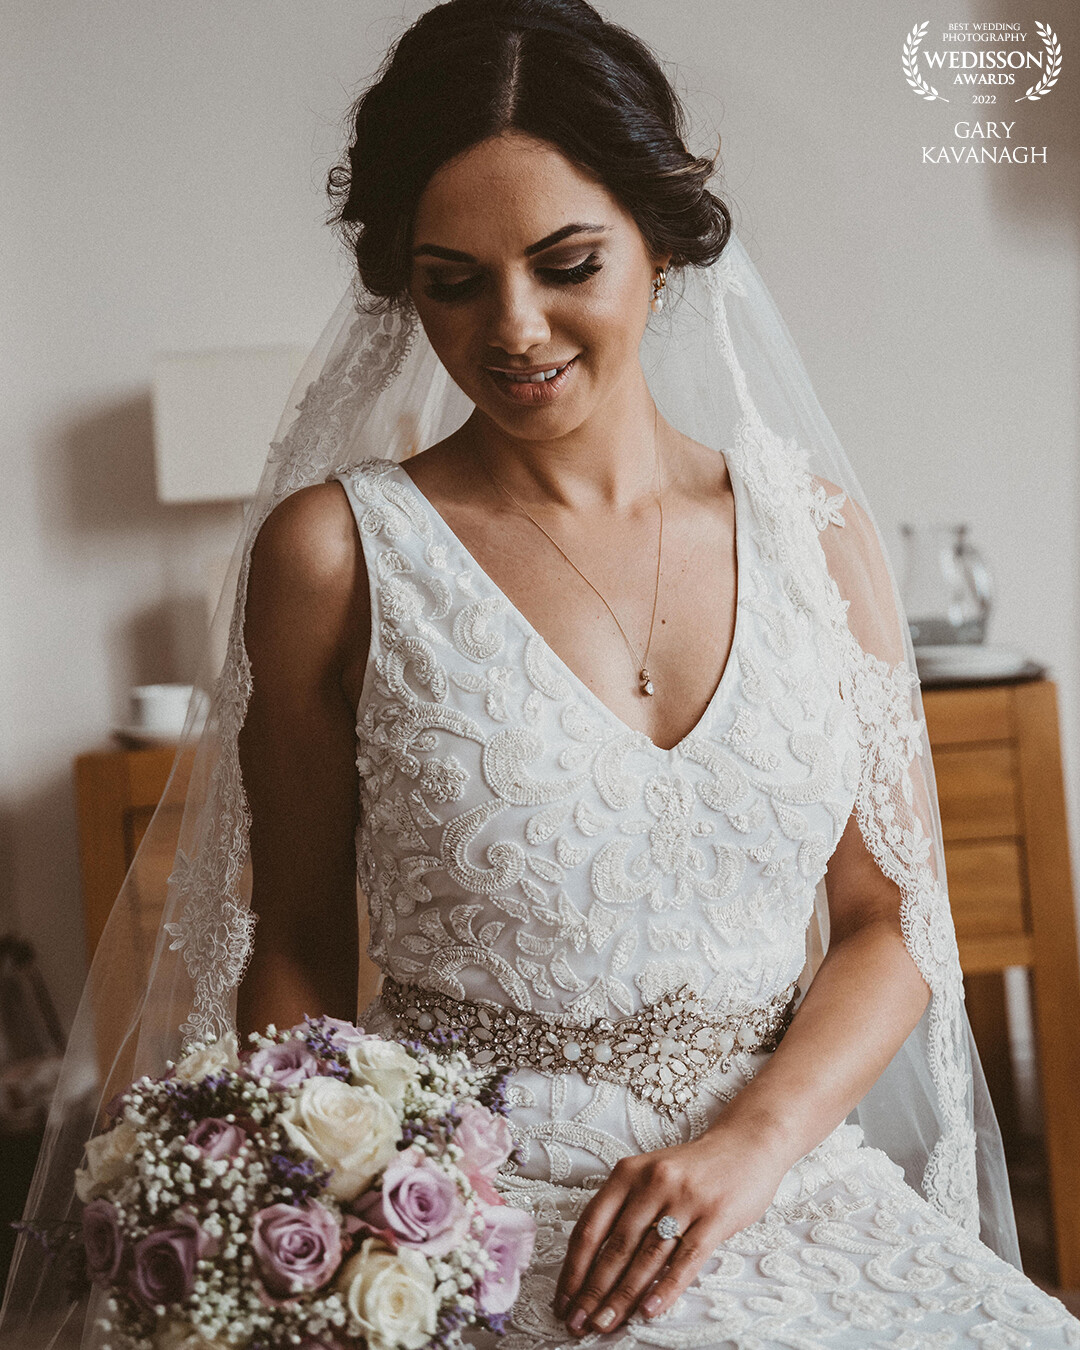 Áine & Patrick were a dream couple to work with - I attended school with Patrick and when asked to be their photographer I was excited just to be part of their day, having won this award it really has made this wedding extra special!